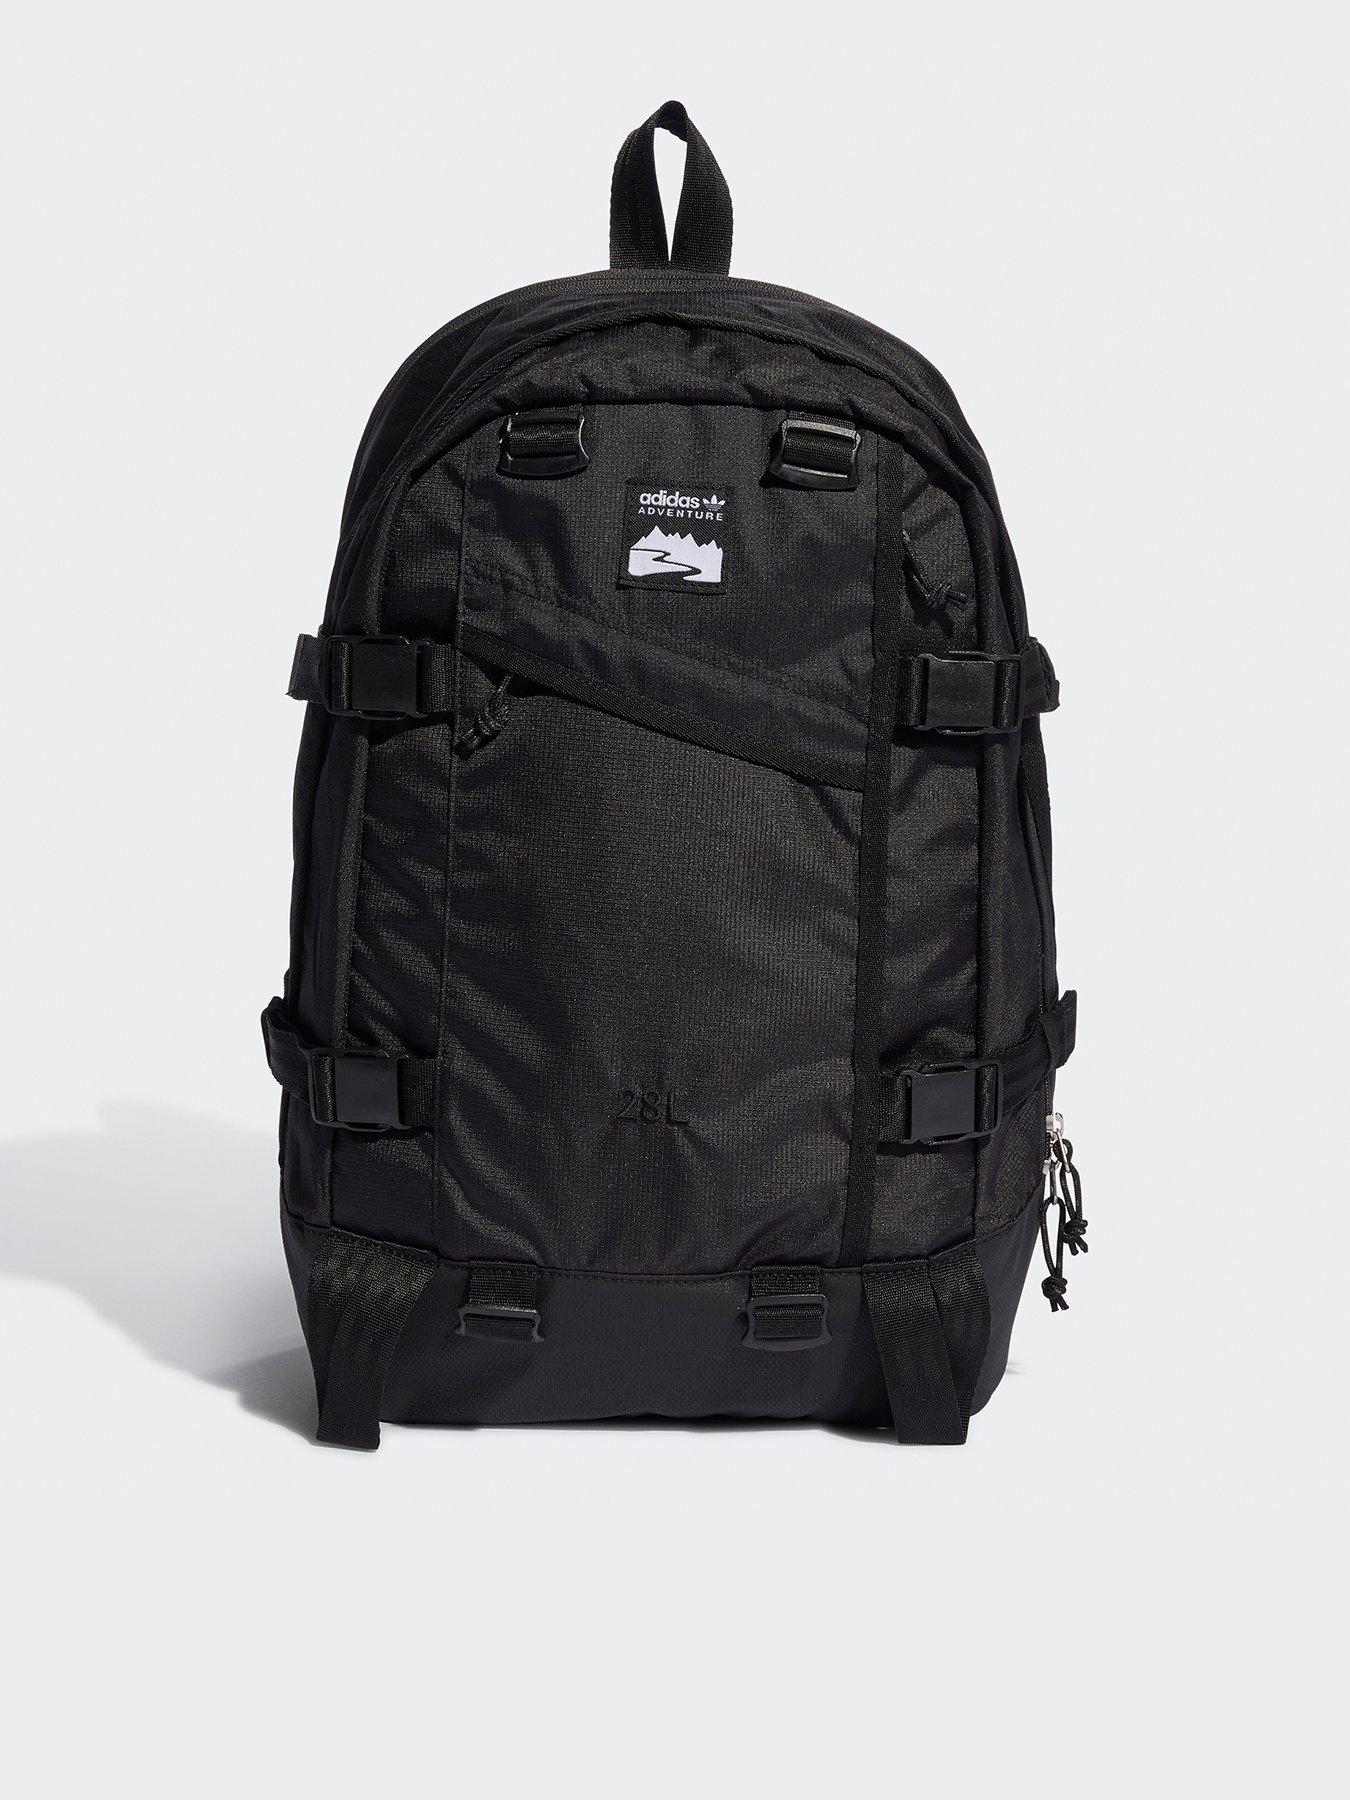 Accessories Adventure Backpack Large